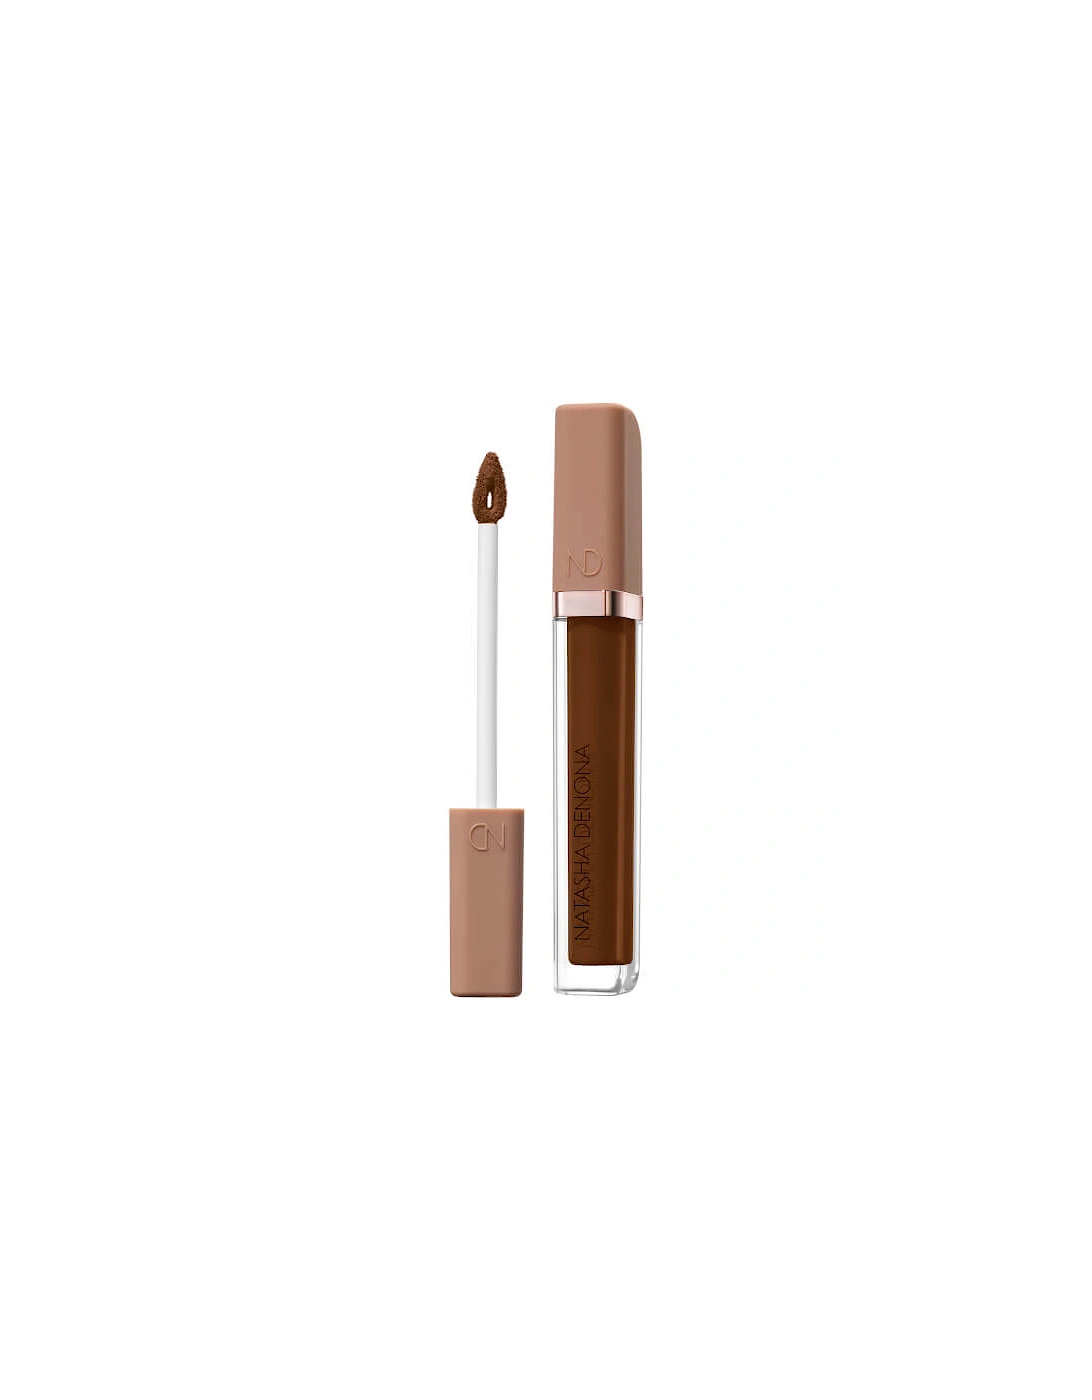 Hy-Glam Concealer - P11, 2 of 1